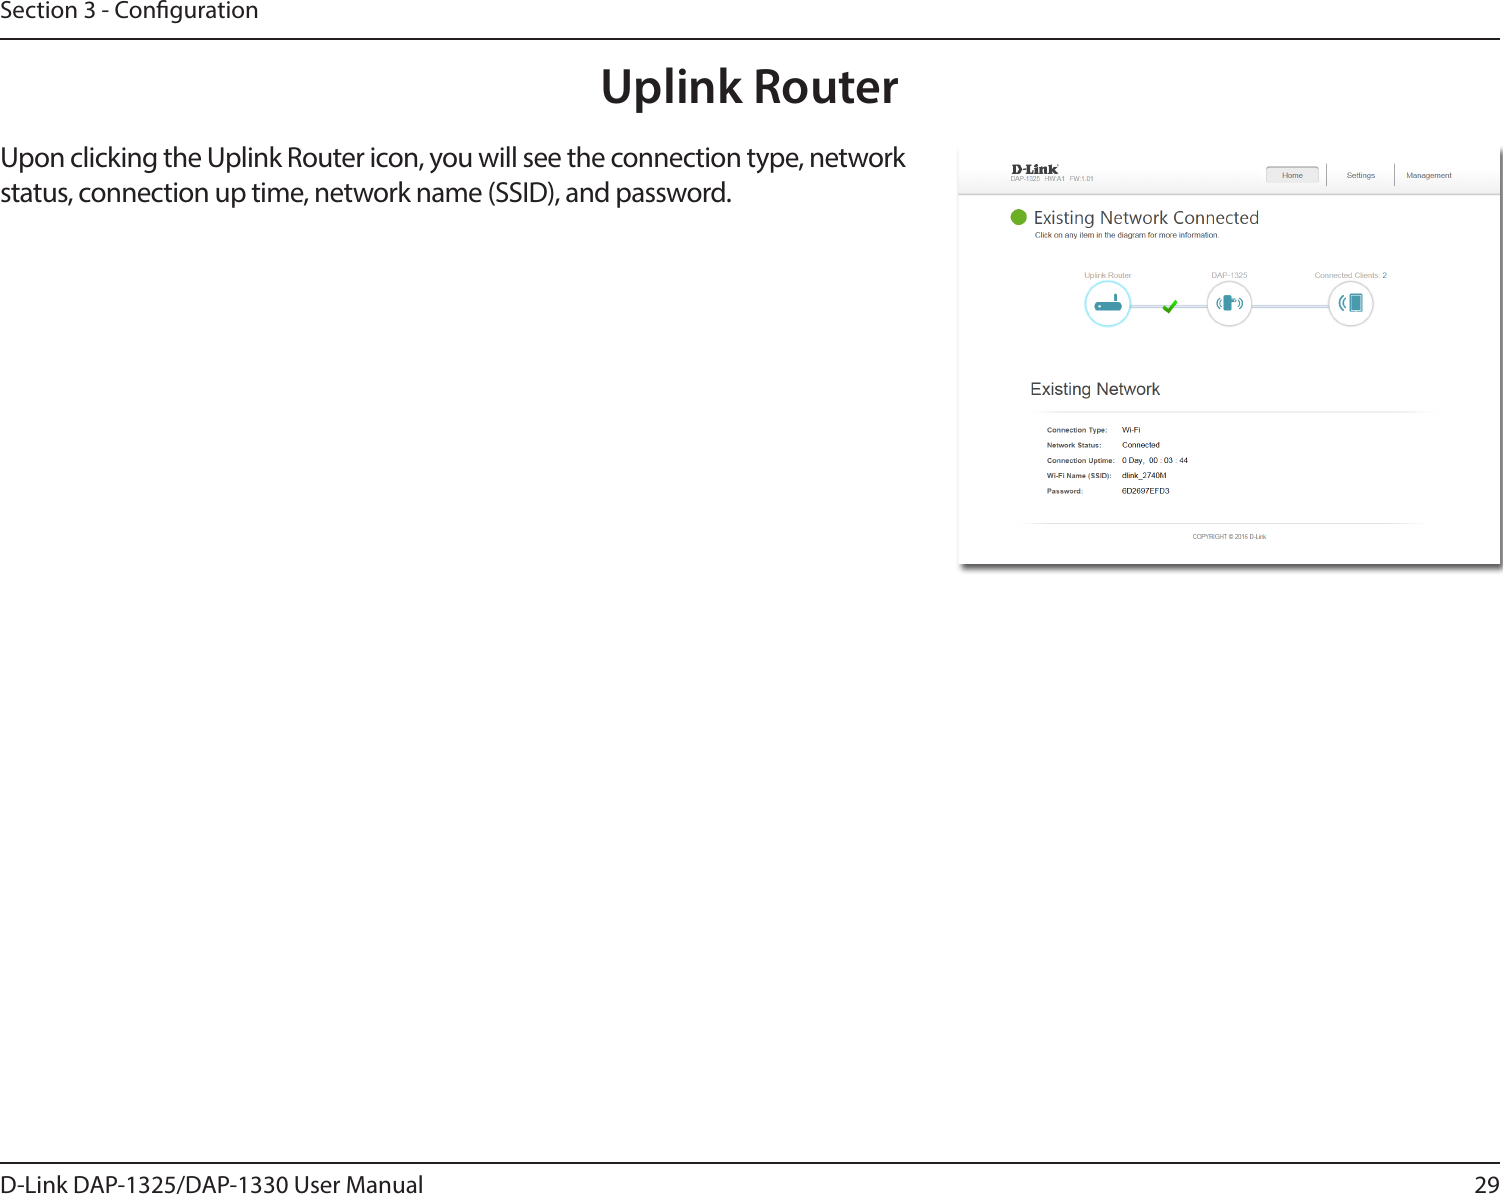 29D-Link DAP-1325/DAP-1330 User ManualSection 3 - CongurationUpon clicking the Uplink Router icon, you will see the connection type, network status, connection up time, network name (SSID), and password.Uplink Router